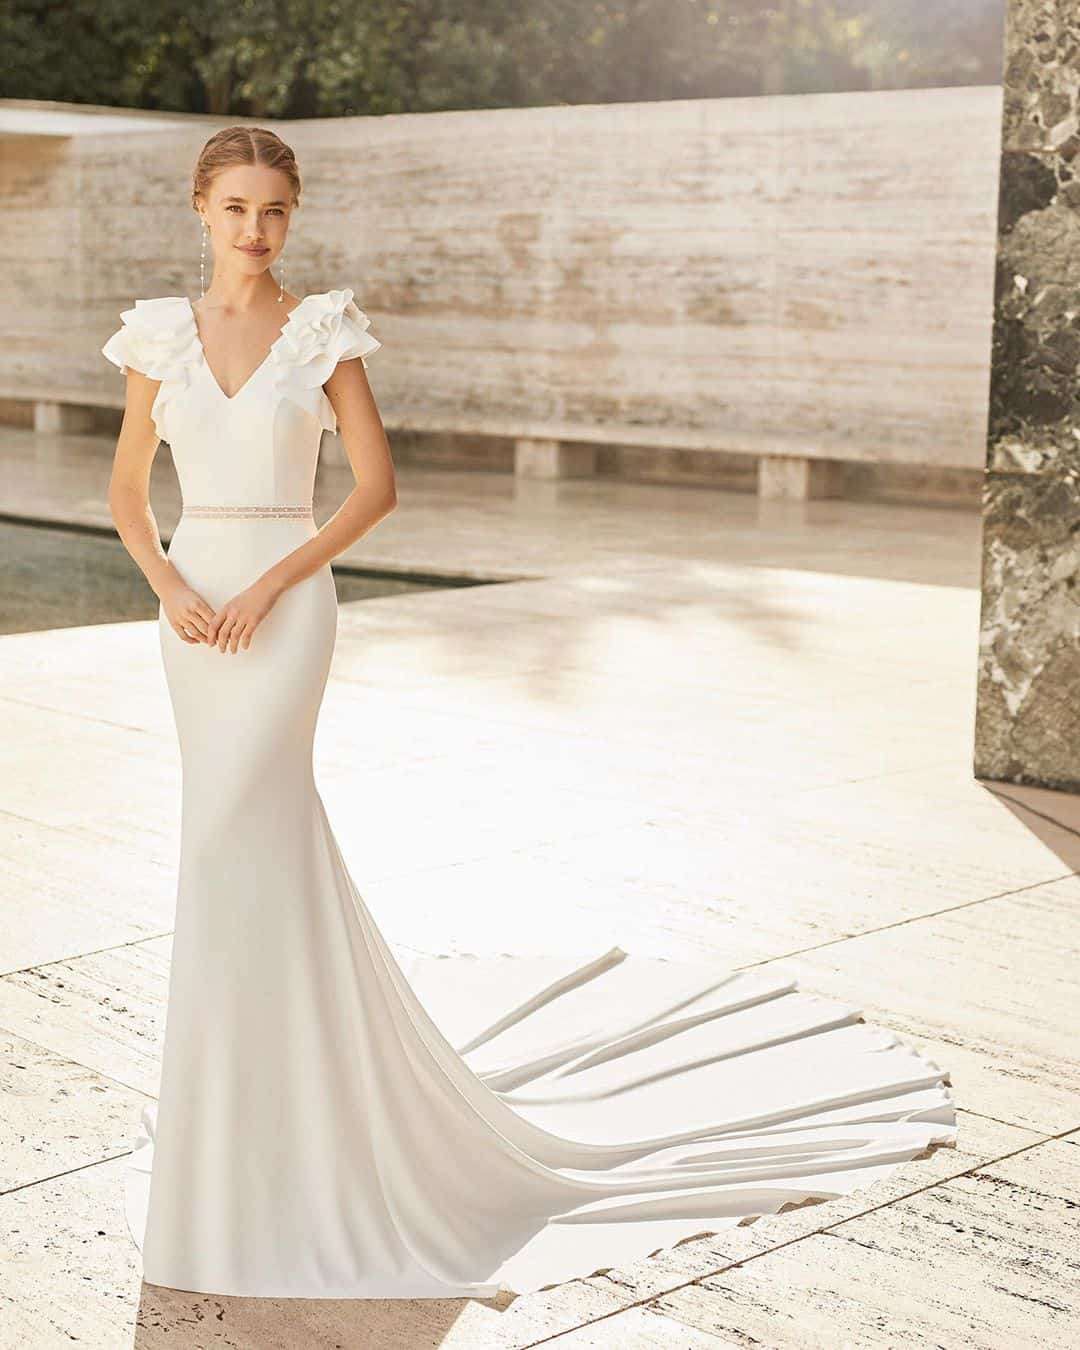 Specially Outstanding and Authentic Wedding Dresses by Rosa Clará